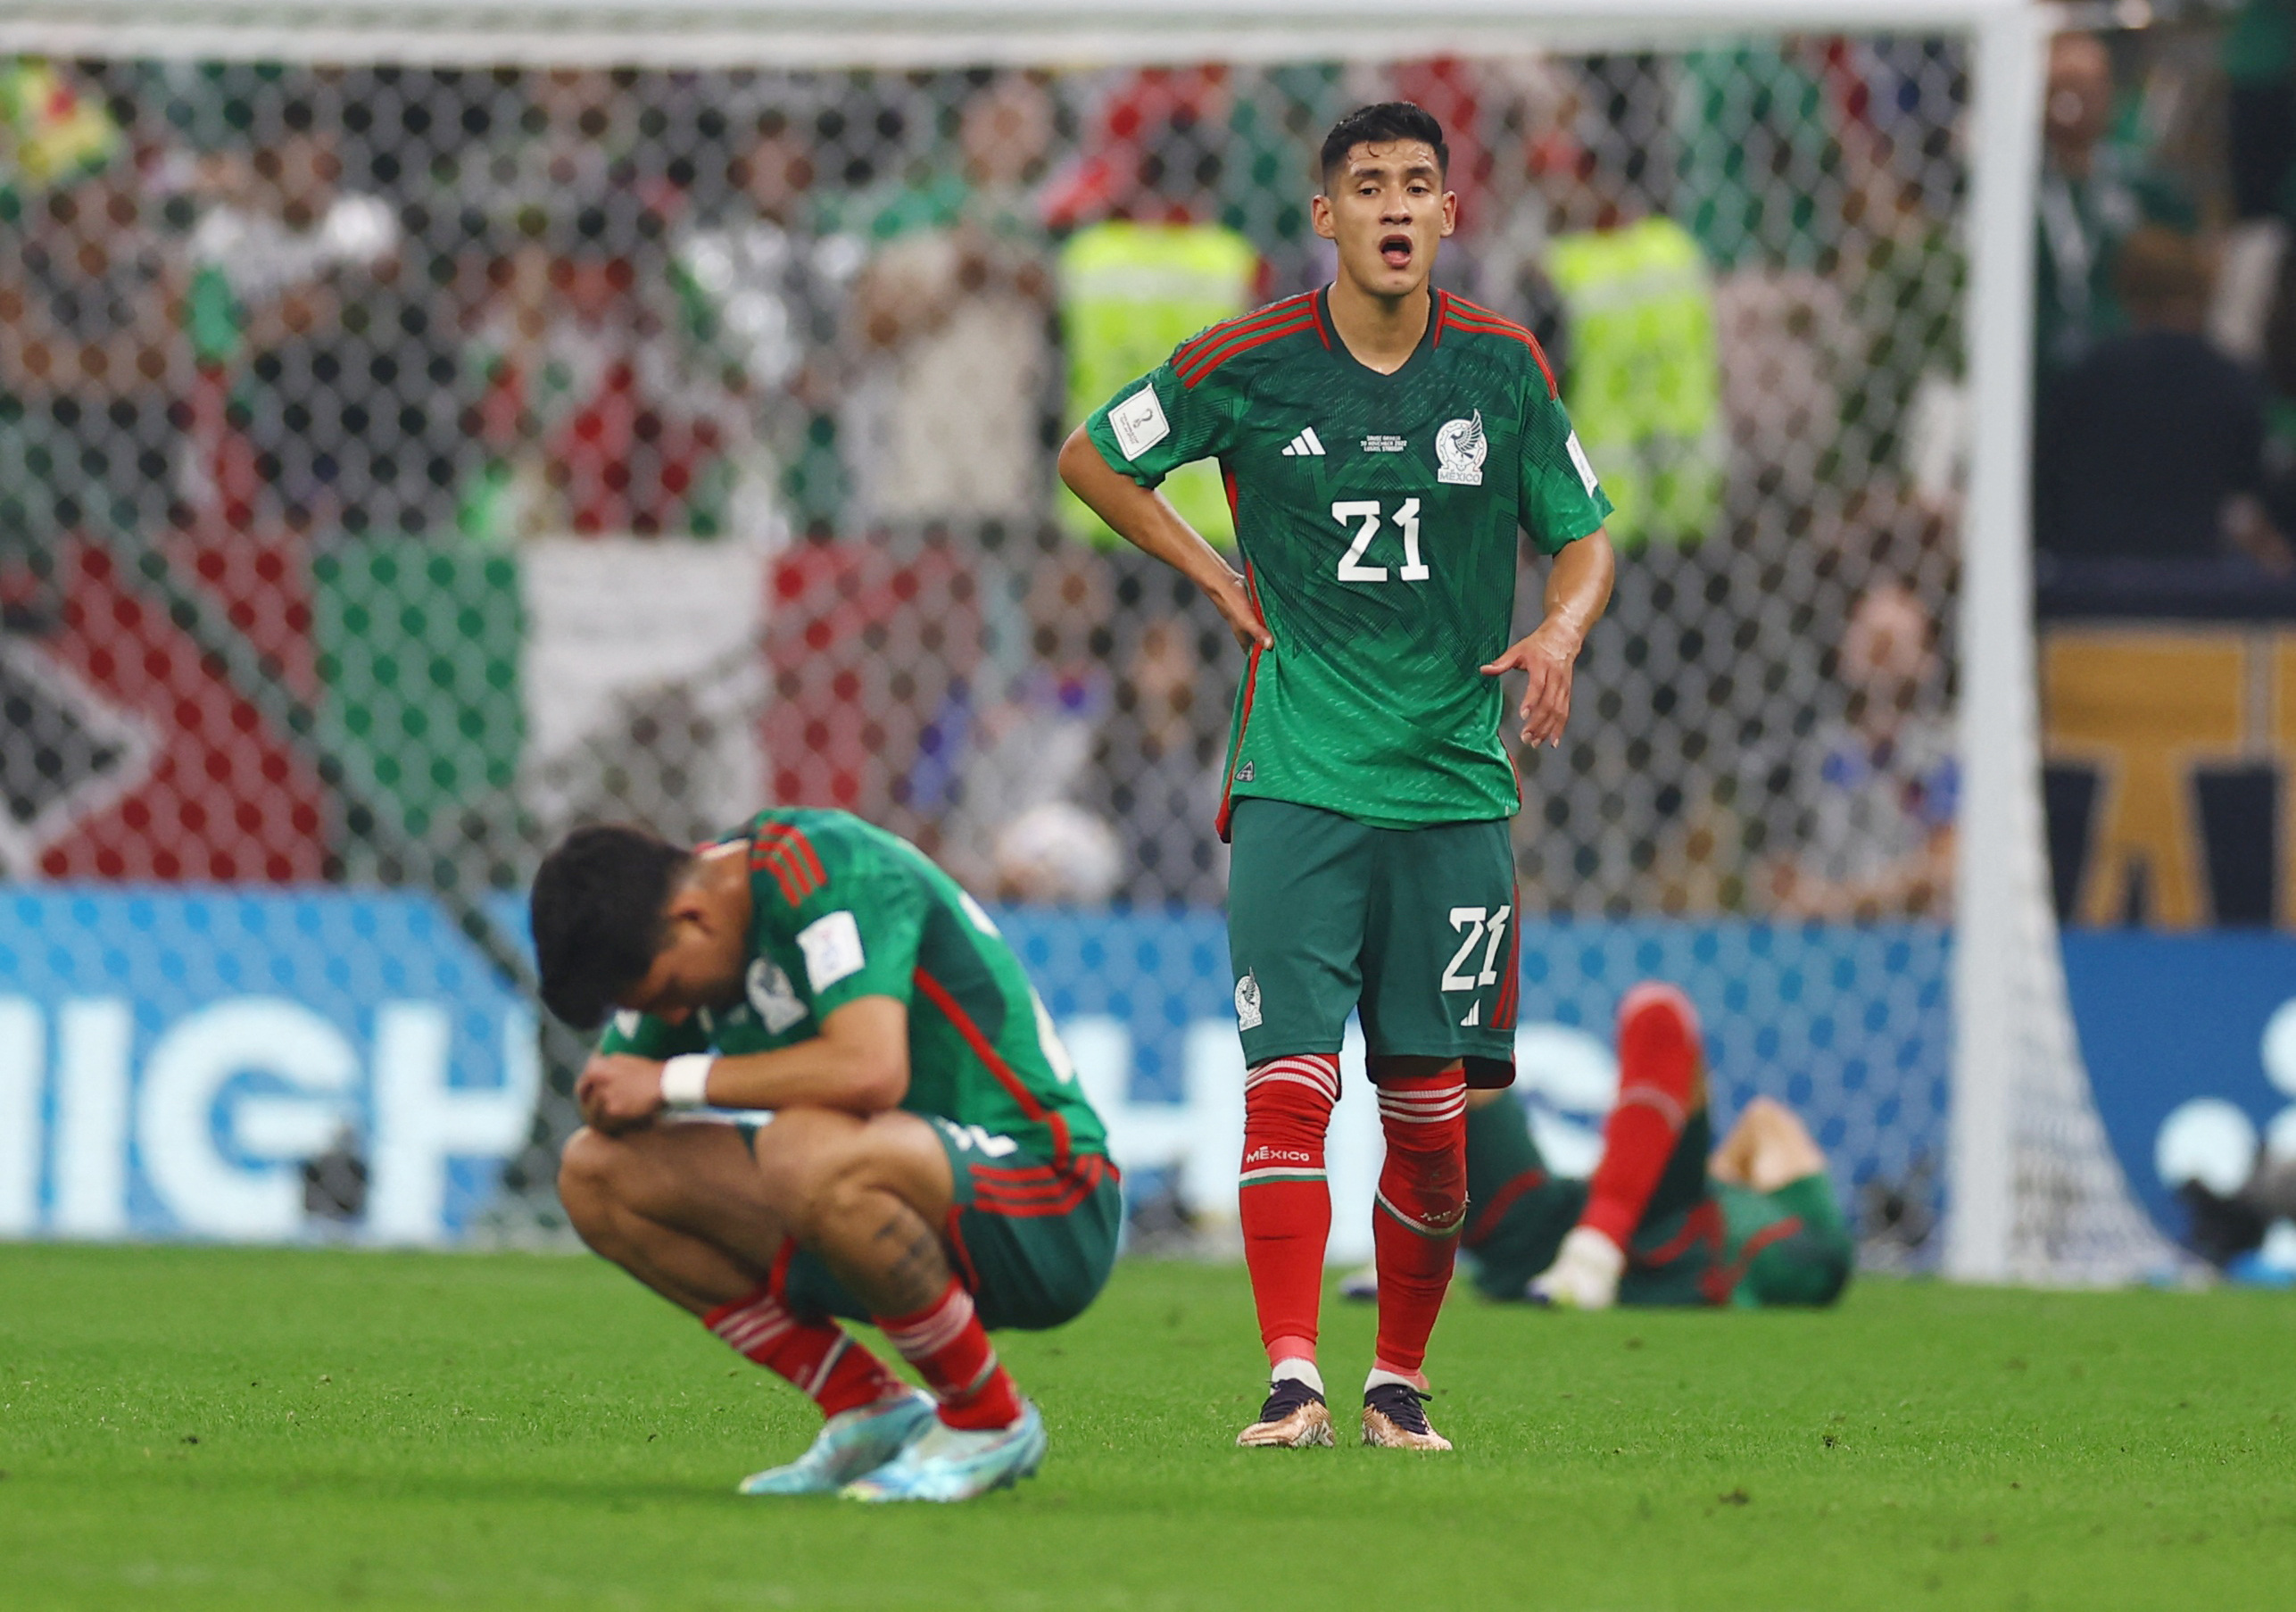 Soccer Football - FIFA World Cup Qatar 2022 - Group C - Saudi Arabia v Mexico - Lusail Stadium, Lusail, Qatar - November 30, 2022 Mexico's Uriel Antuna looks dejected after being eliminated from the World Cup REUTERS/Kai Pfaffenbach